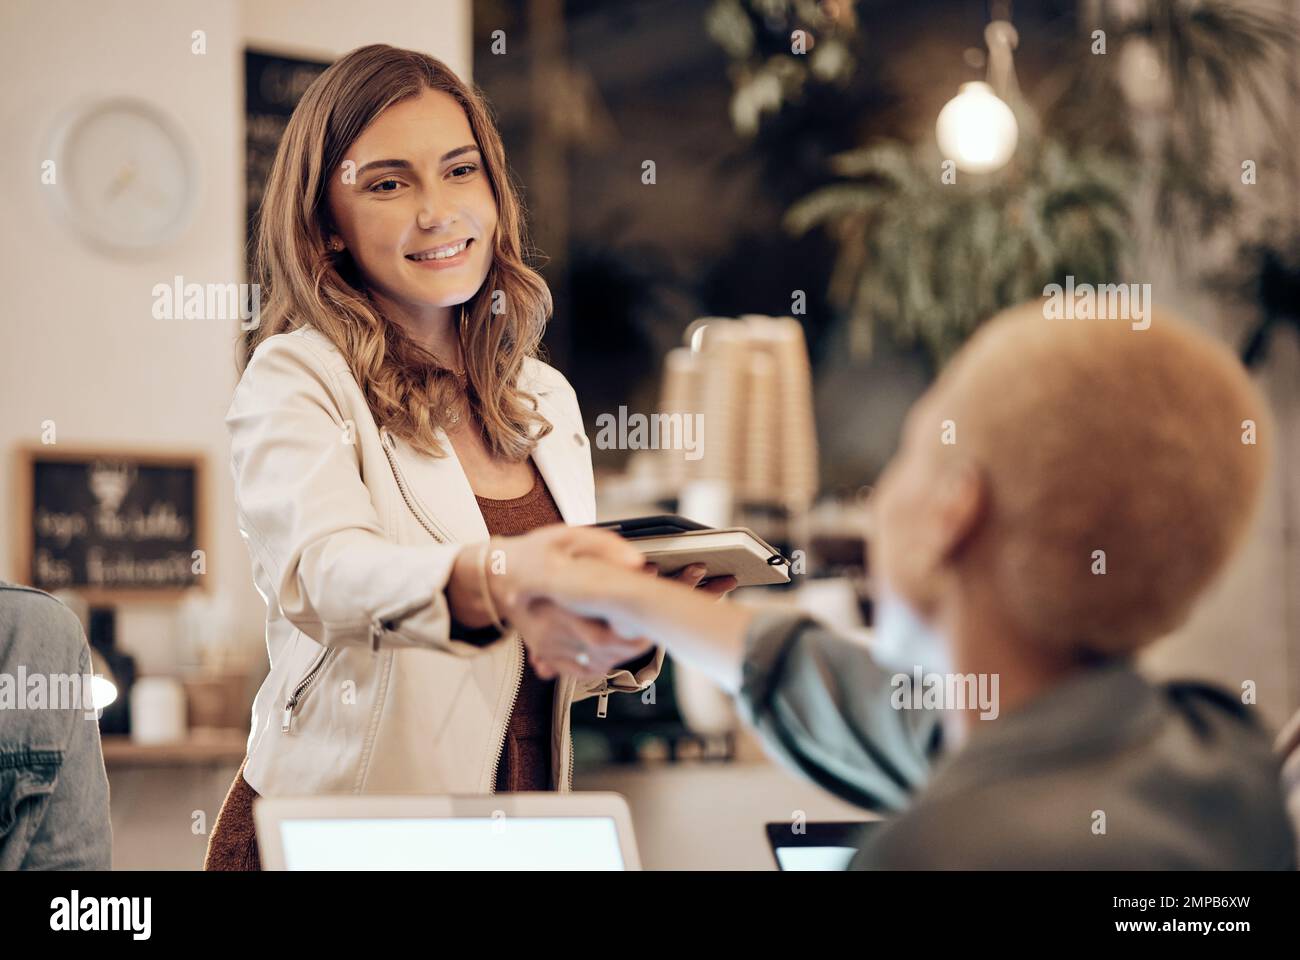 Handshake, coffee shop and service with a woman customer saying thank you to a waitress in a restaurant. Cafe, sale and welcome with a female consumer Stock Photo